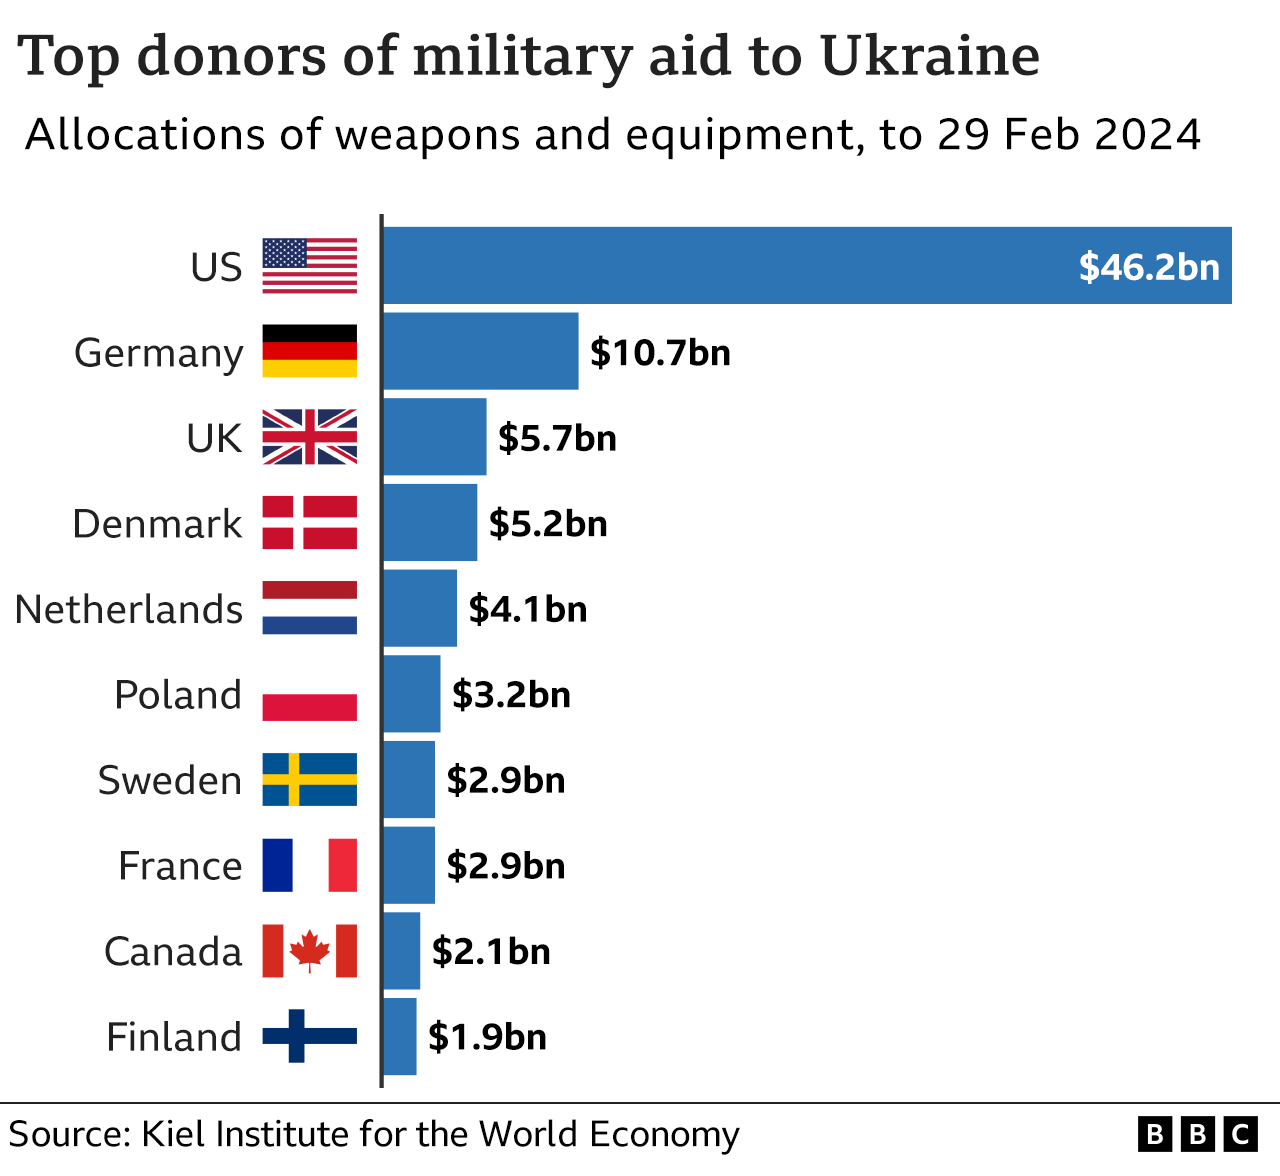 Bar chart showing military aid given to Ukraine by top donor countries